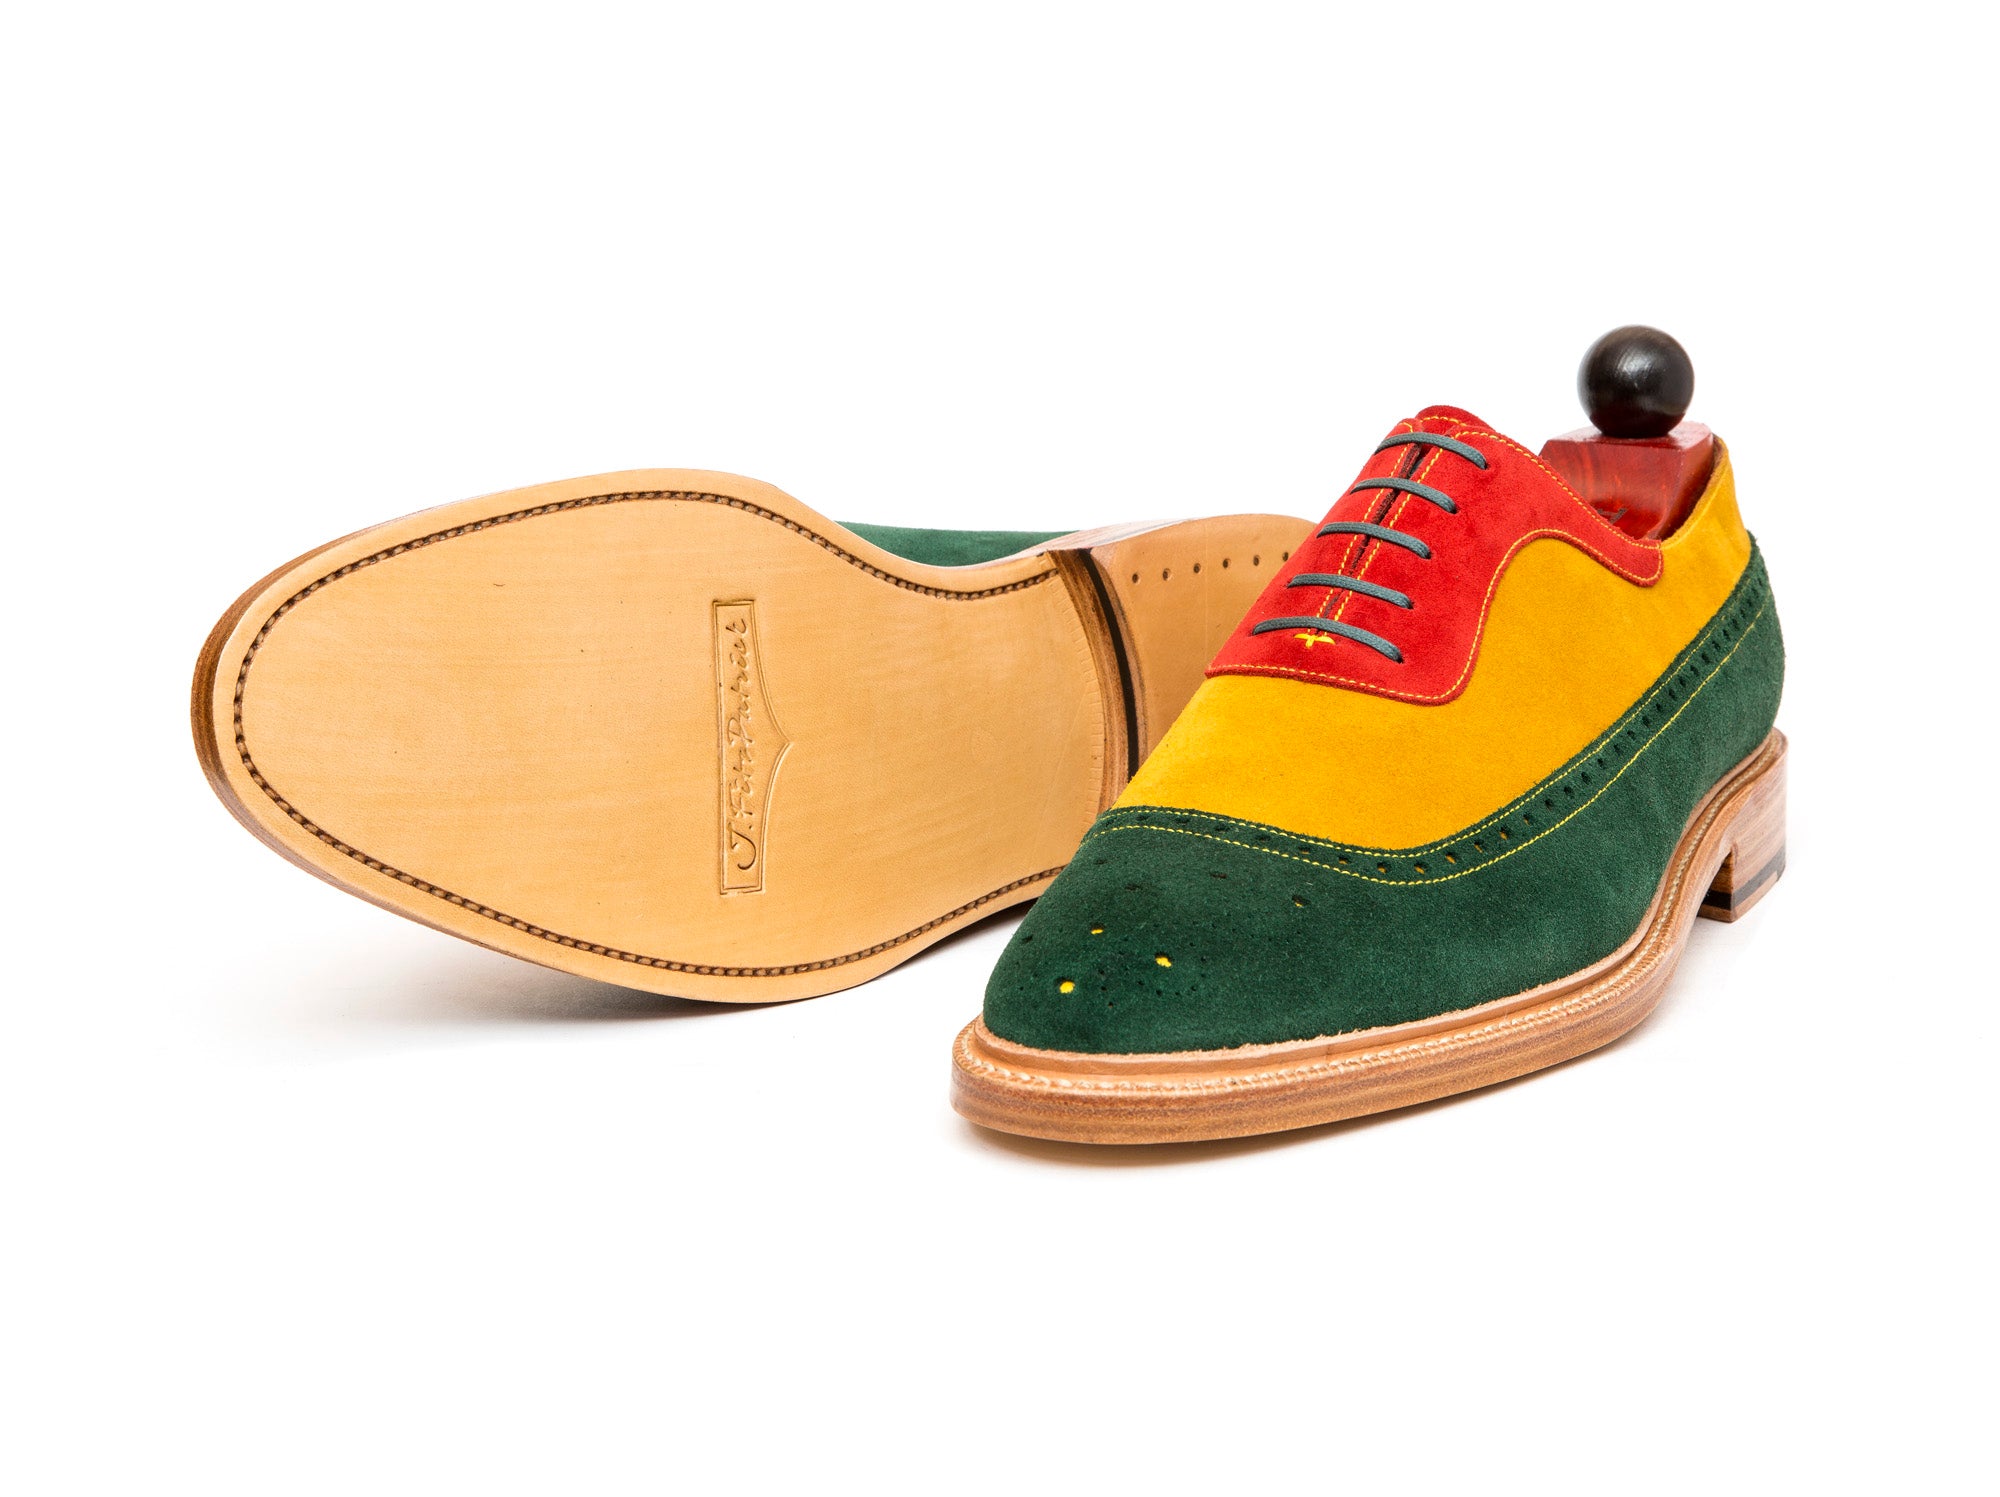 Edmonds - MTO - Green, Red, Yellow Suede - LPB Last - Storm Welt - Natural Double Leather Sole